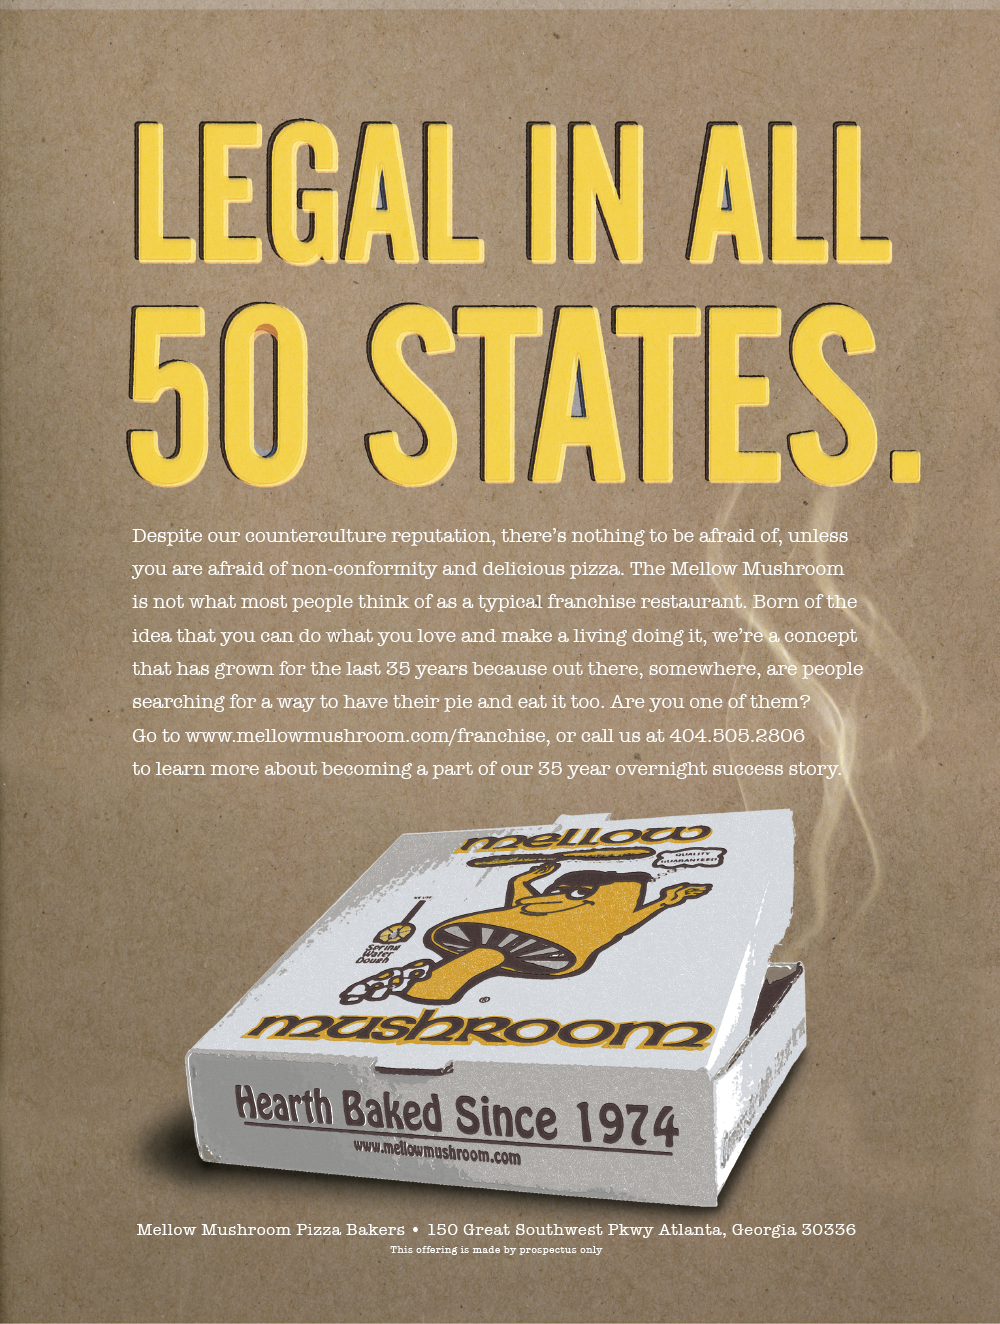 Legal in 50 states franchise advertisement